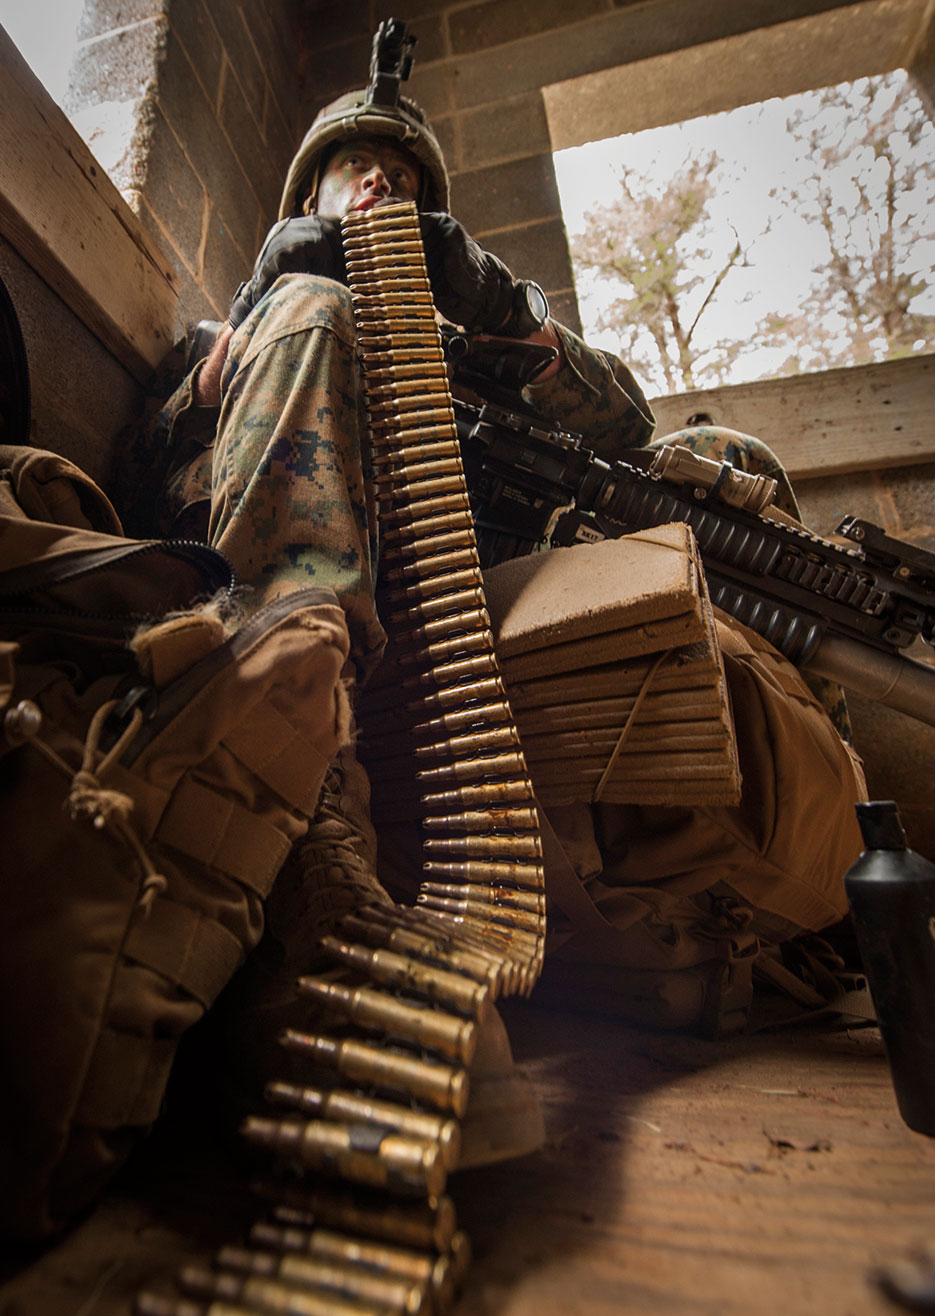 U.S. Marine Corps officer assigned to Company A, The Basic School, prepares his ammunition during “The War” field training exercise aboard Marine Corps Base Quantico, April 16, 2015 (U.S. Marine Corps/Ezekiel R. Kitandwe)